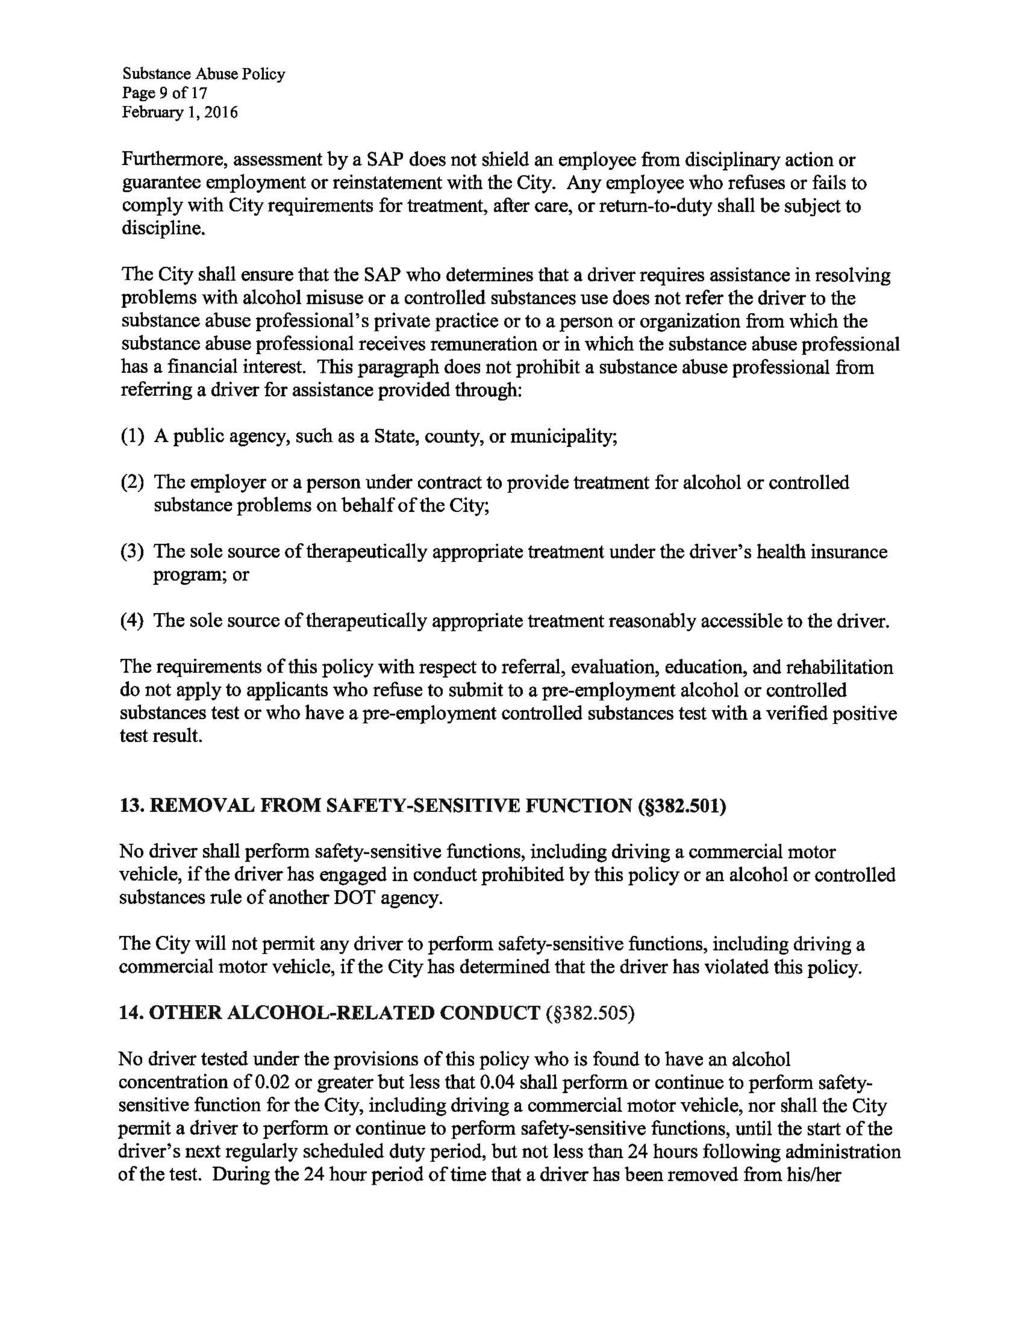 Page 9 of17 Furthennore, assessment by a SAP does not shield an employee from disciplinary action or guarantee employment or reinstatement with the City.